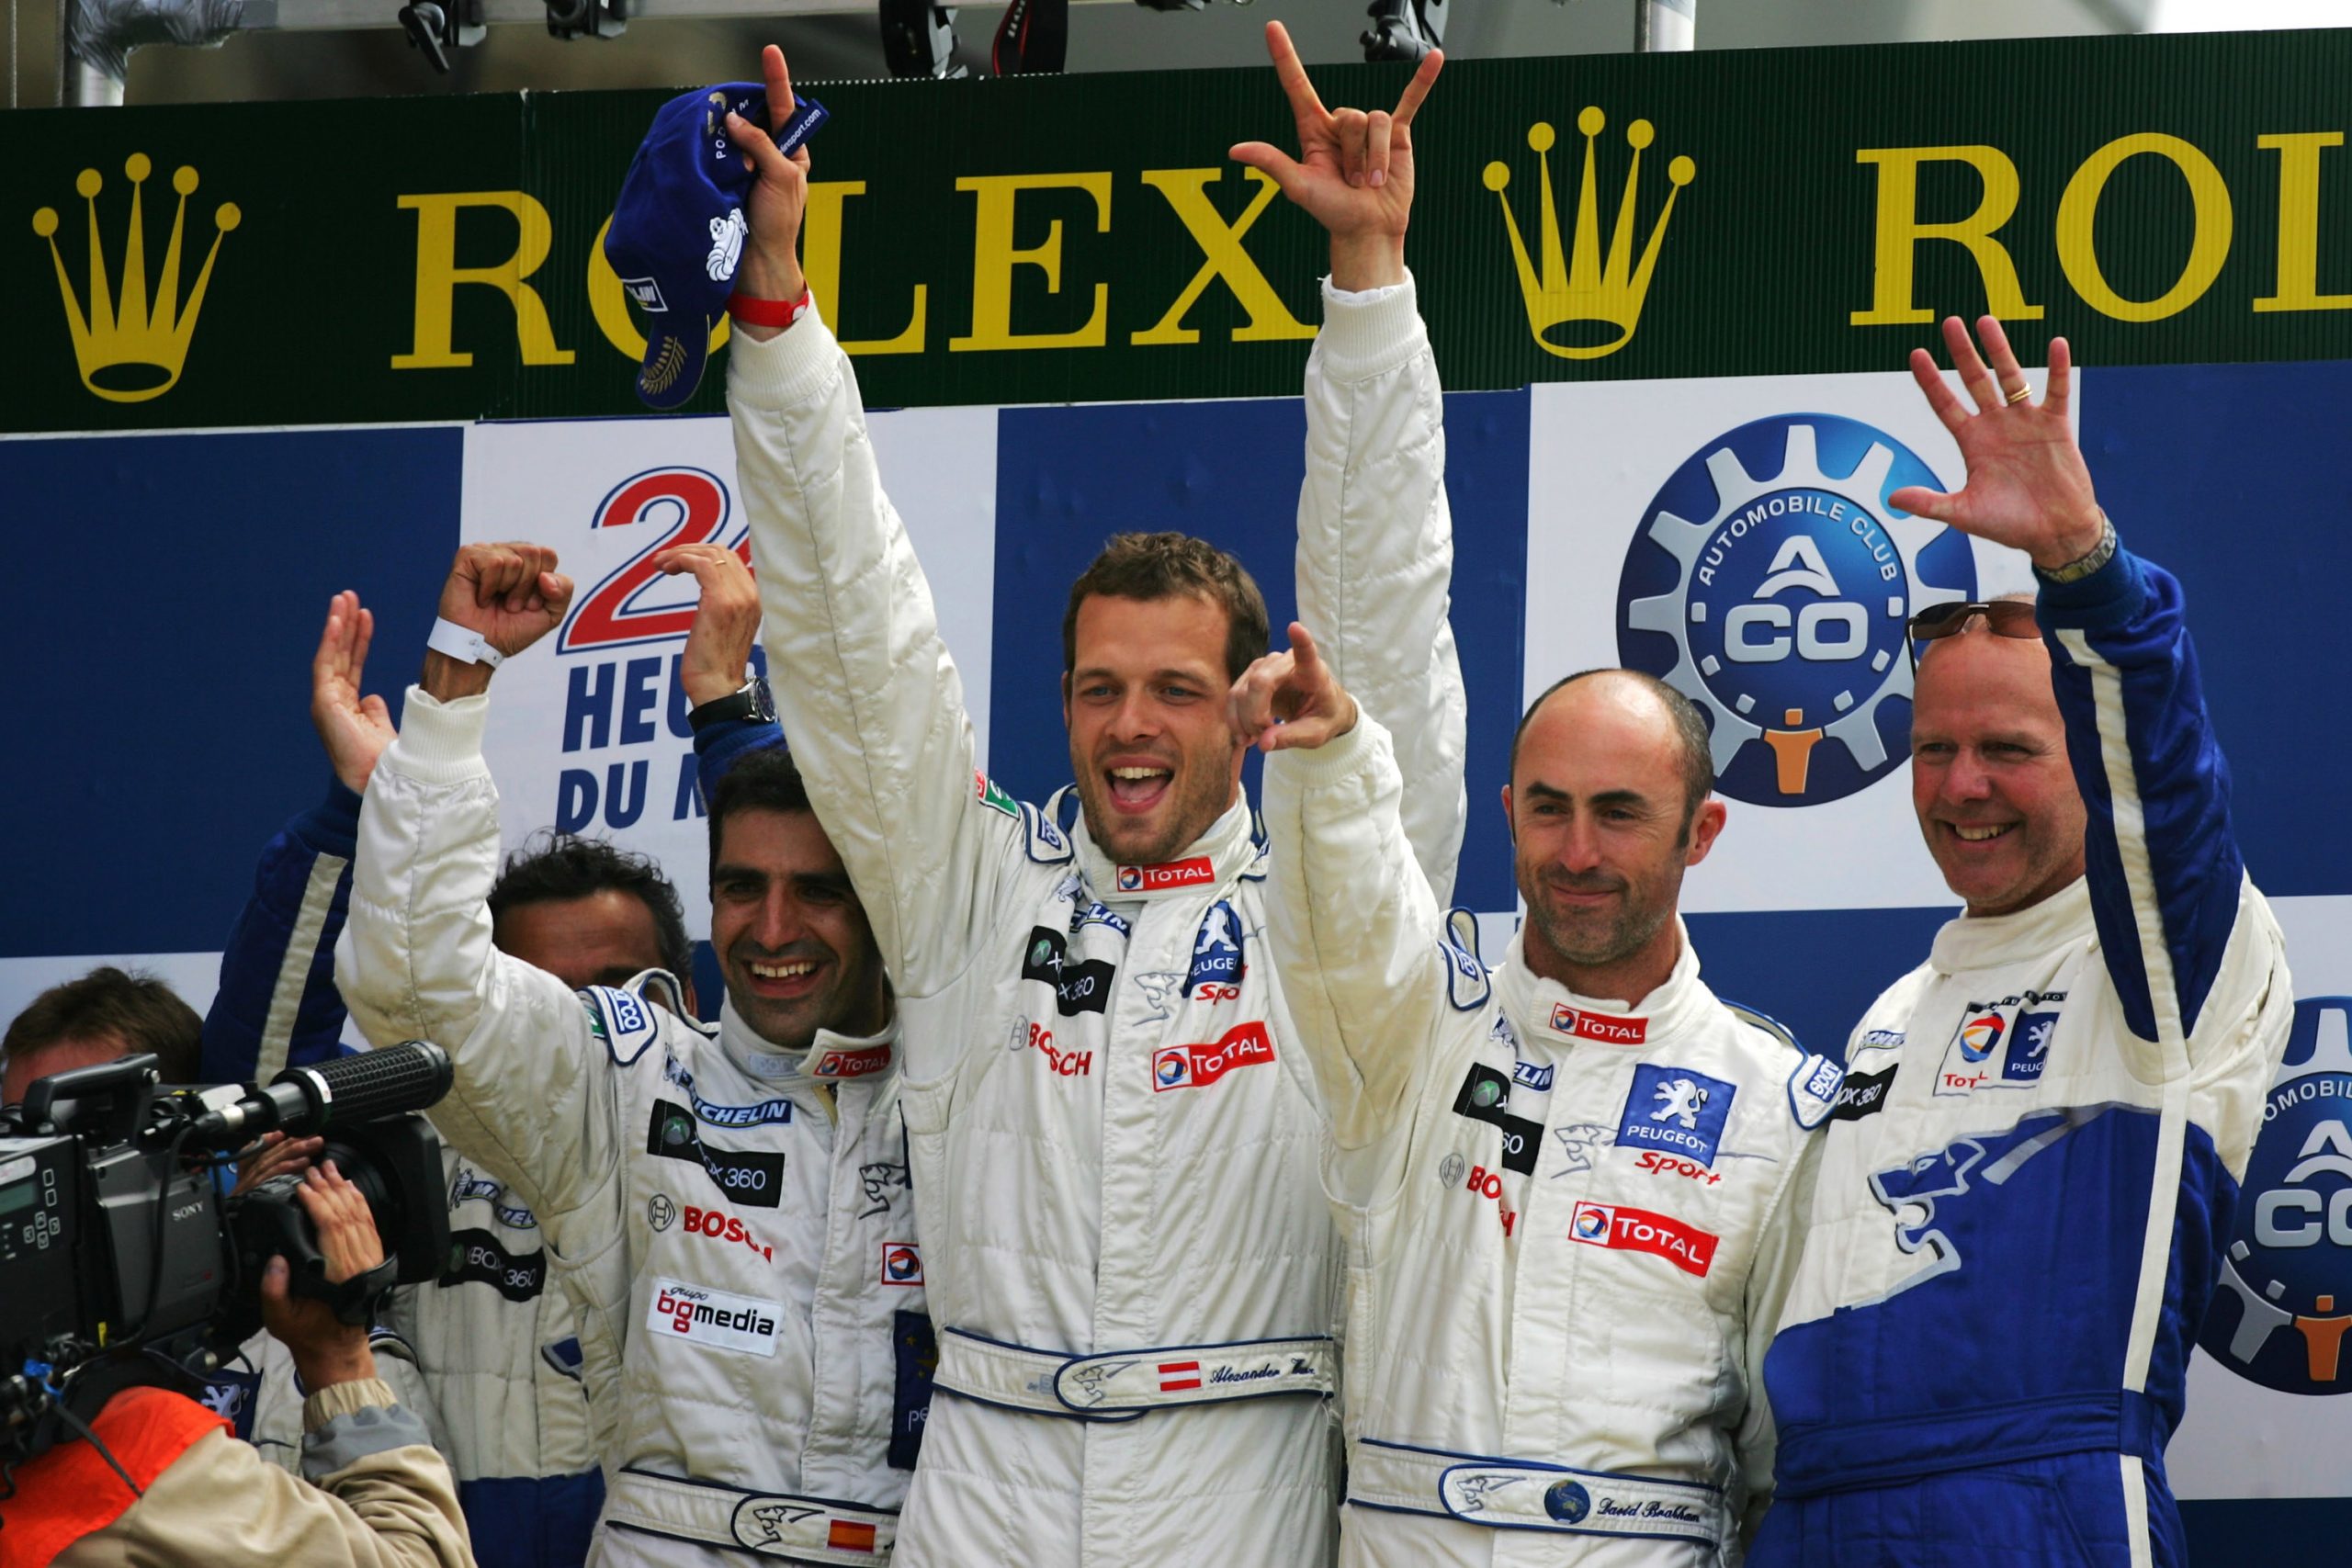 Peugeot drivers Marc Gene of Spain, Alex Wurz of Austria, David Brabham of Australia and Olivier Quesnel director of Peugeot Sport celebrate winning the 77th running of the 24 Hours of Le Mans.